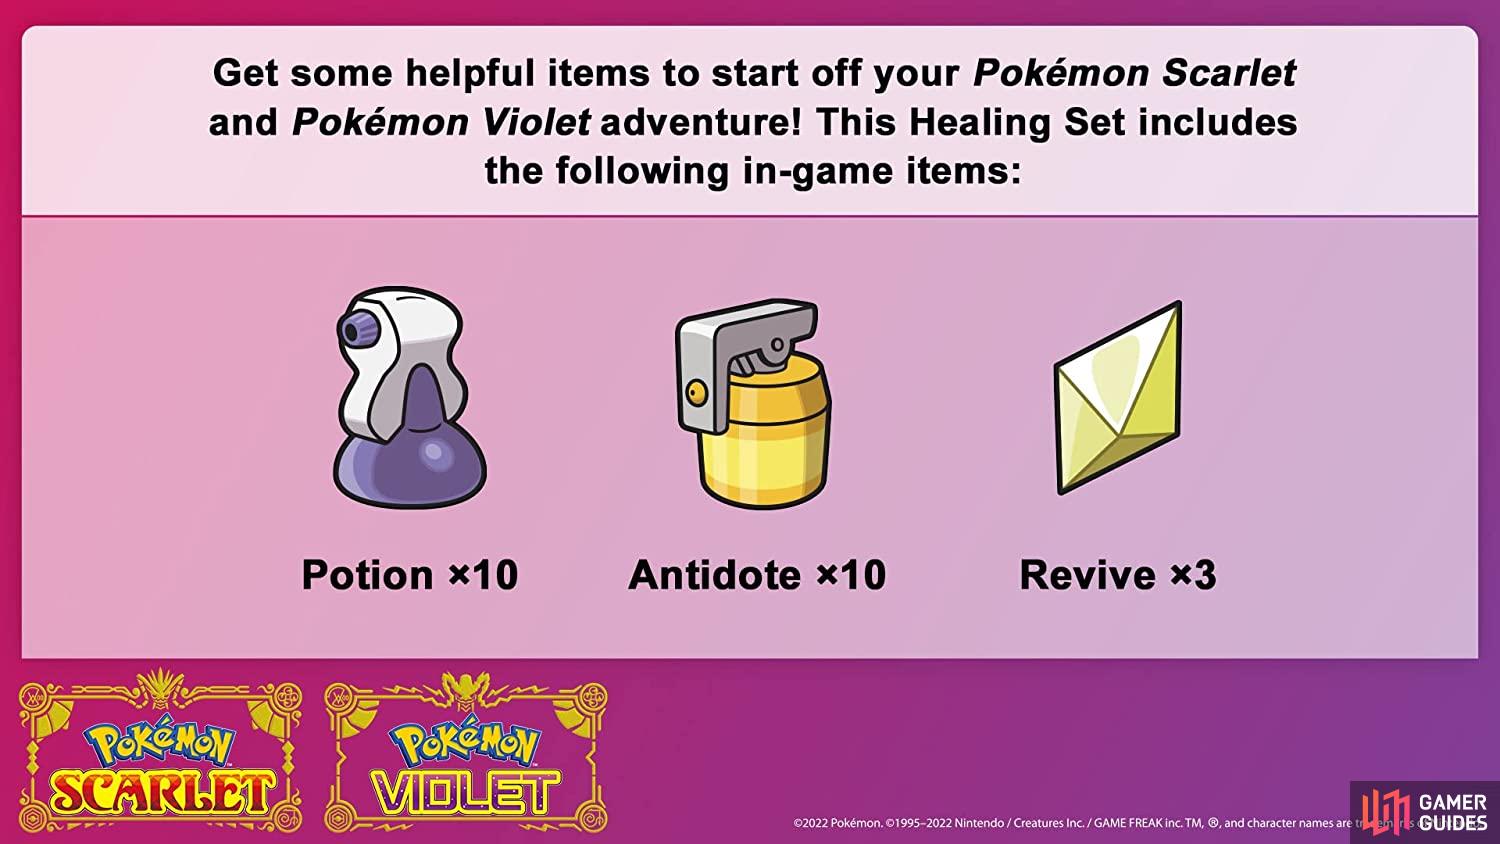 Items included in the Healing Set. (Credit: The Pokémon Company)